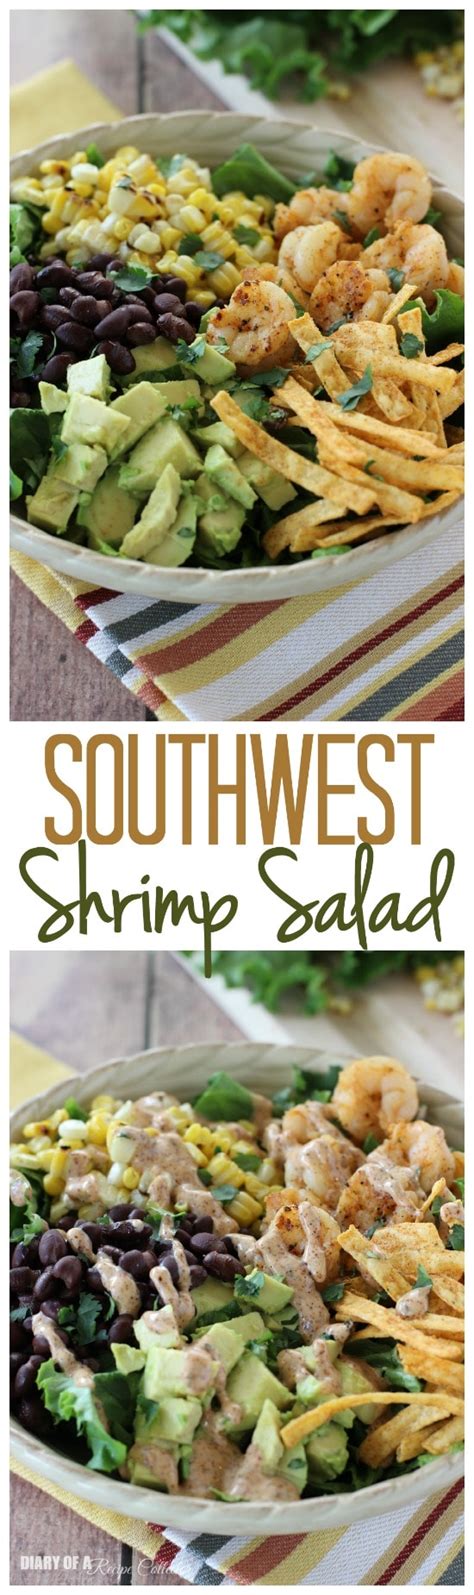 southwest-shrimp-salad-diary-of-a-recipe-collector image